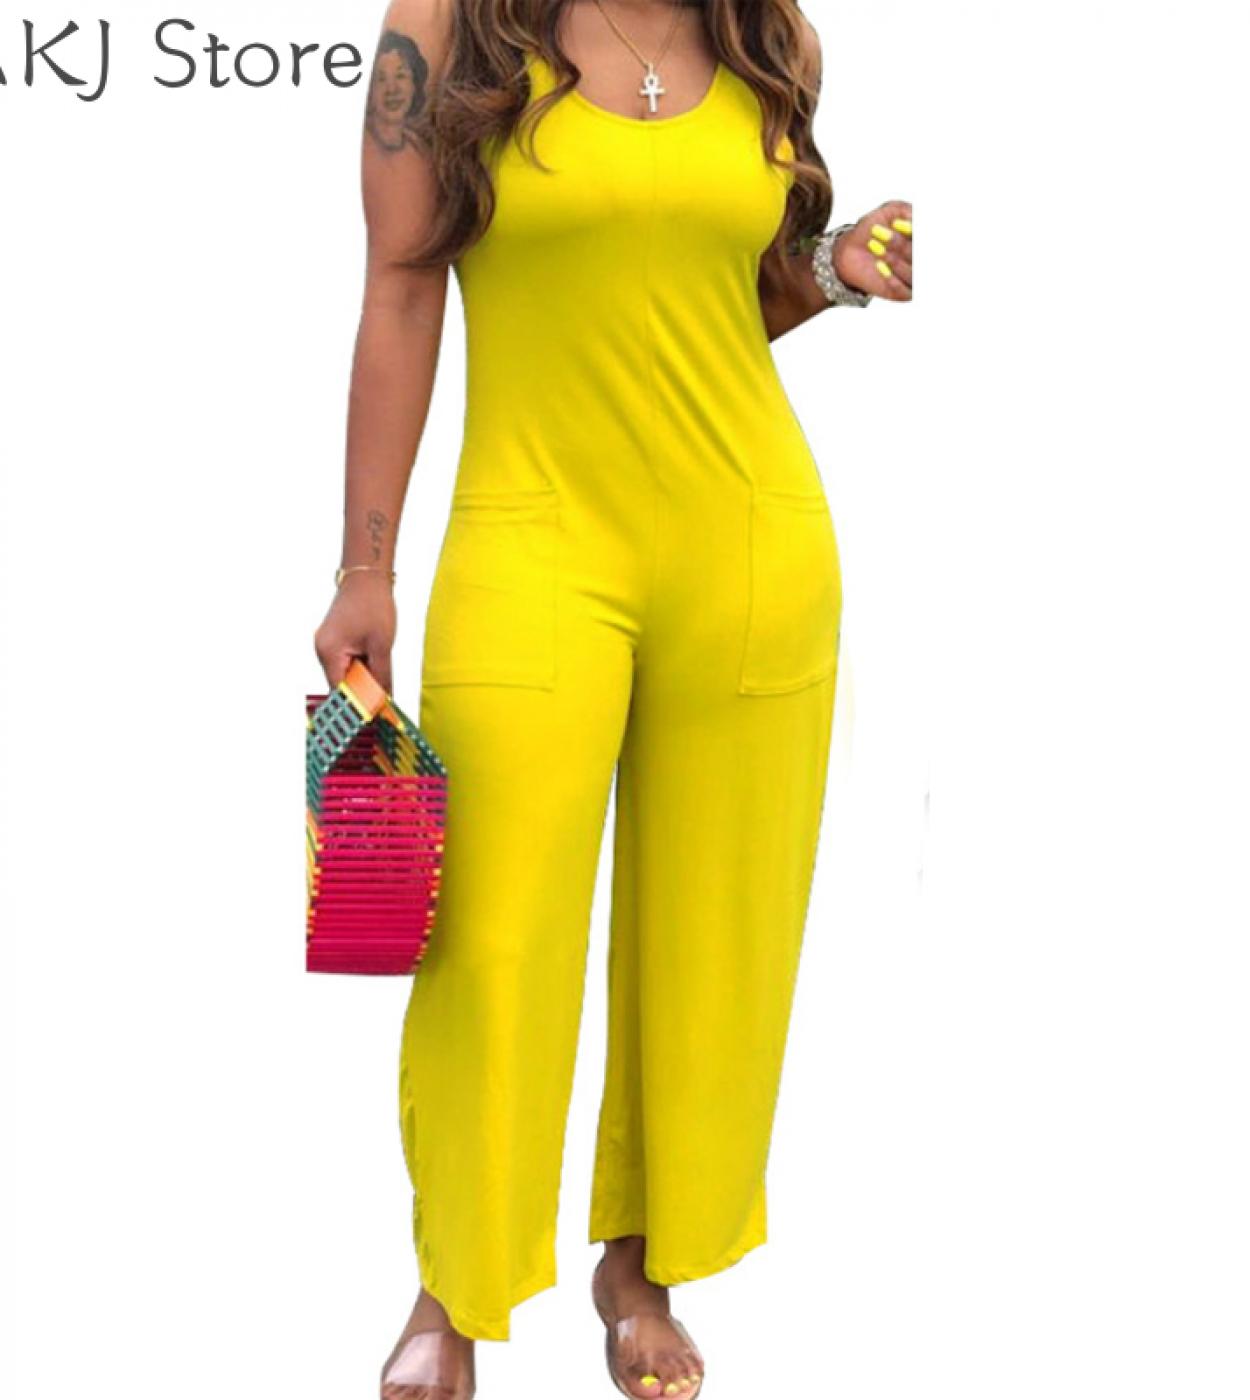 Women Jumpsuit Lady Sleeveless Romper Womens Jumpsuit Party Streetwear Outfit Clothes Party Playsuit  Jumpsuits